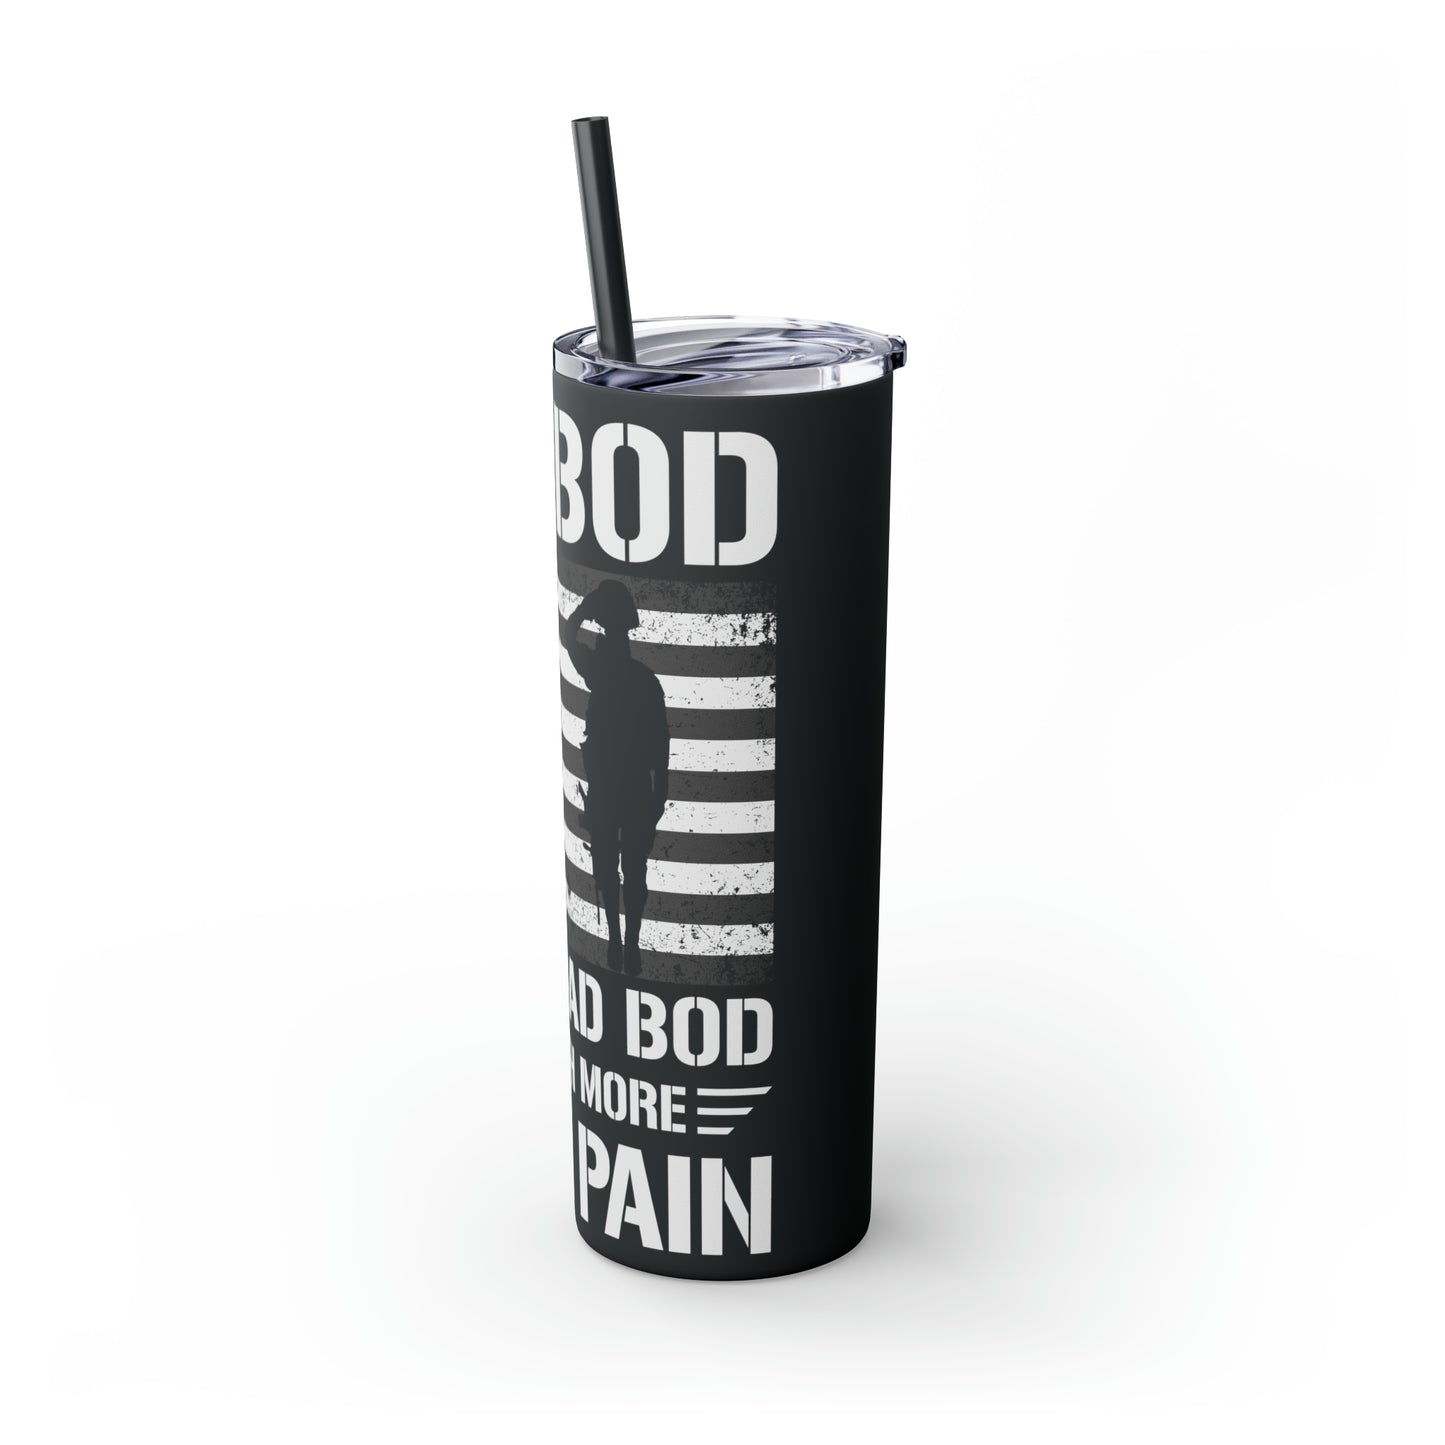 Vet Bod Like a Dad Bod But With More Back Pain Skinny Tumbler with Straw, 20oz